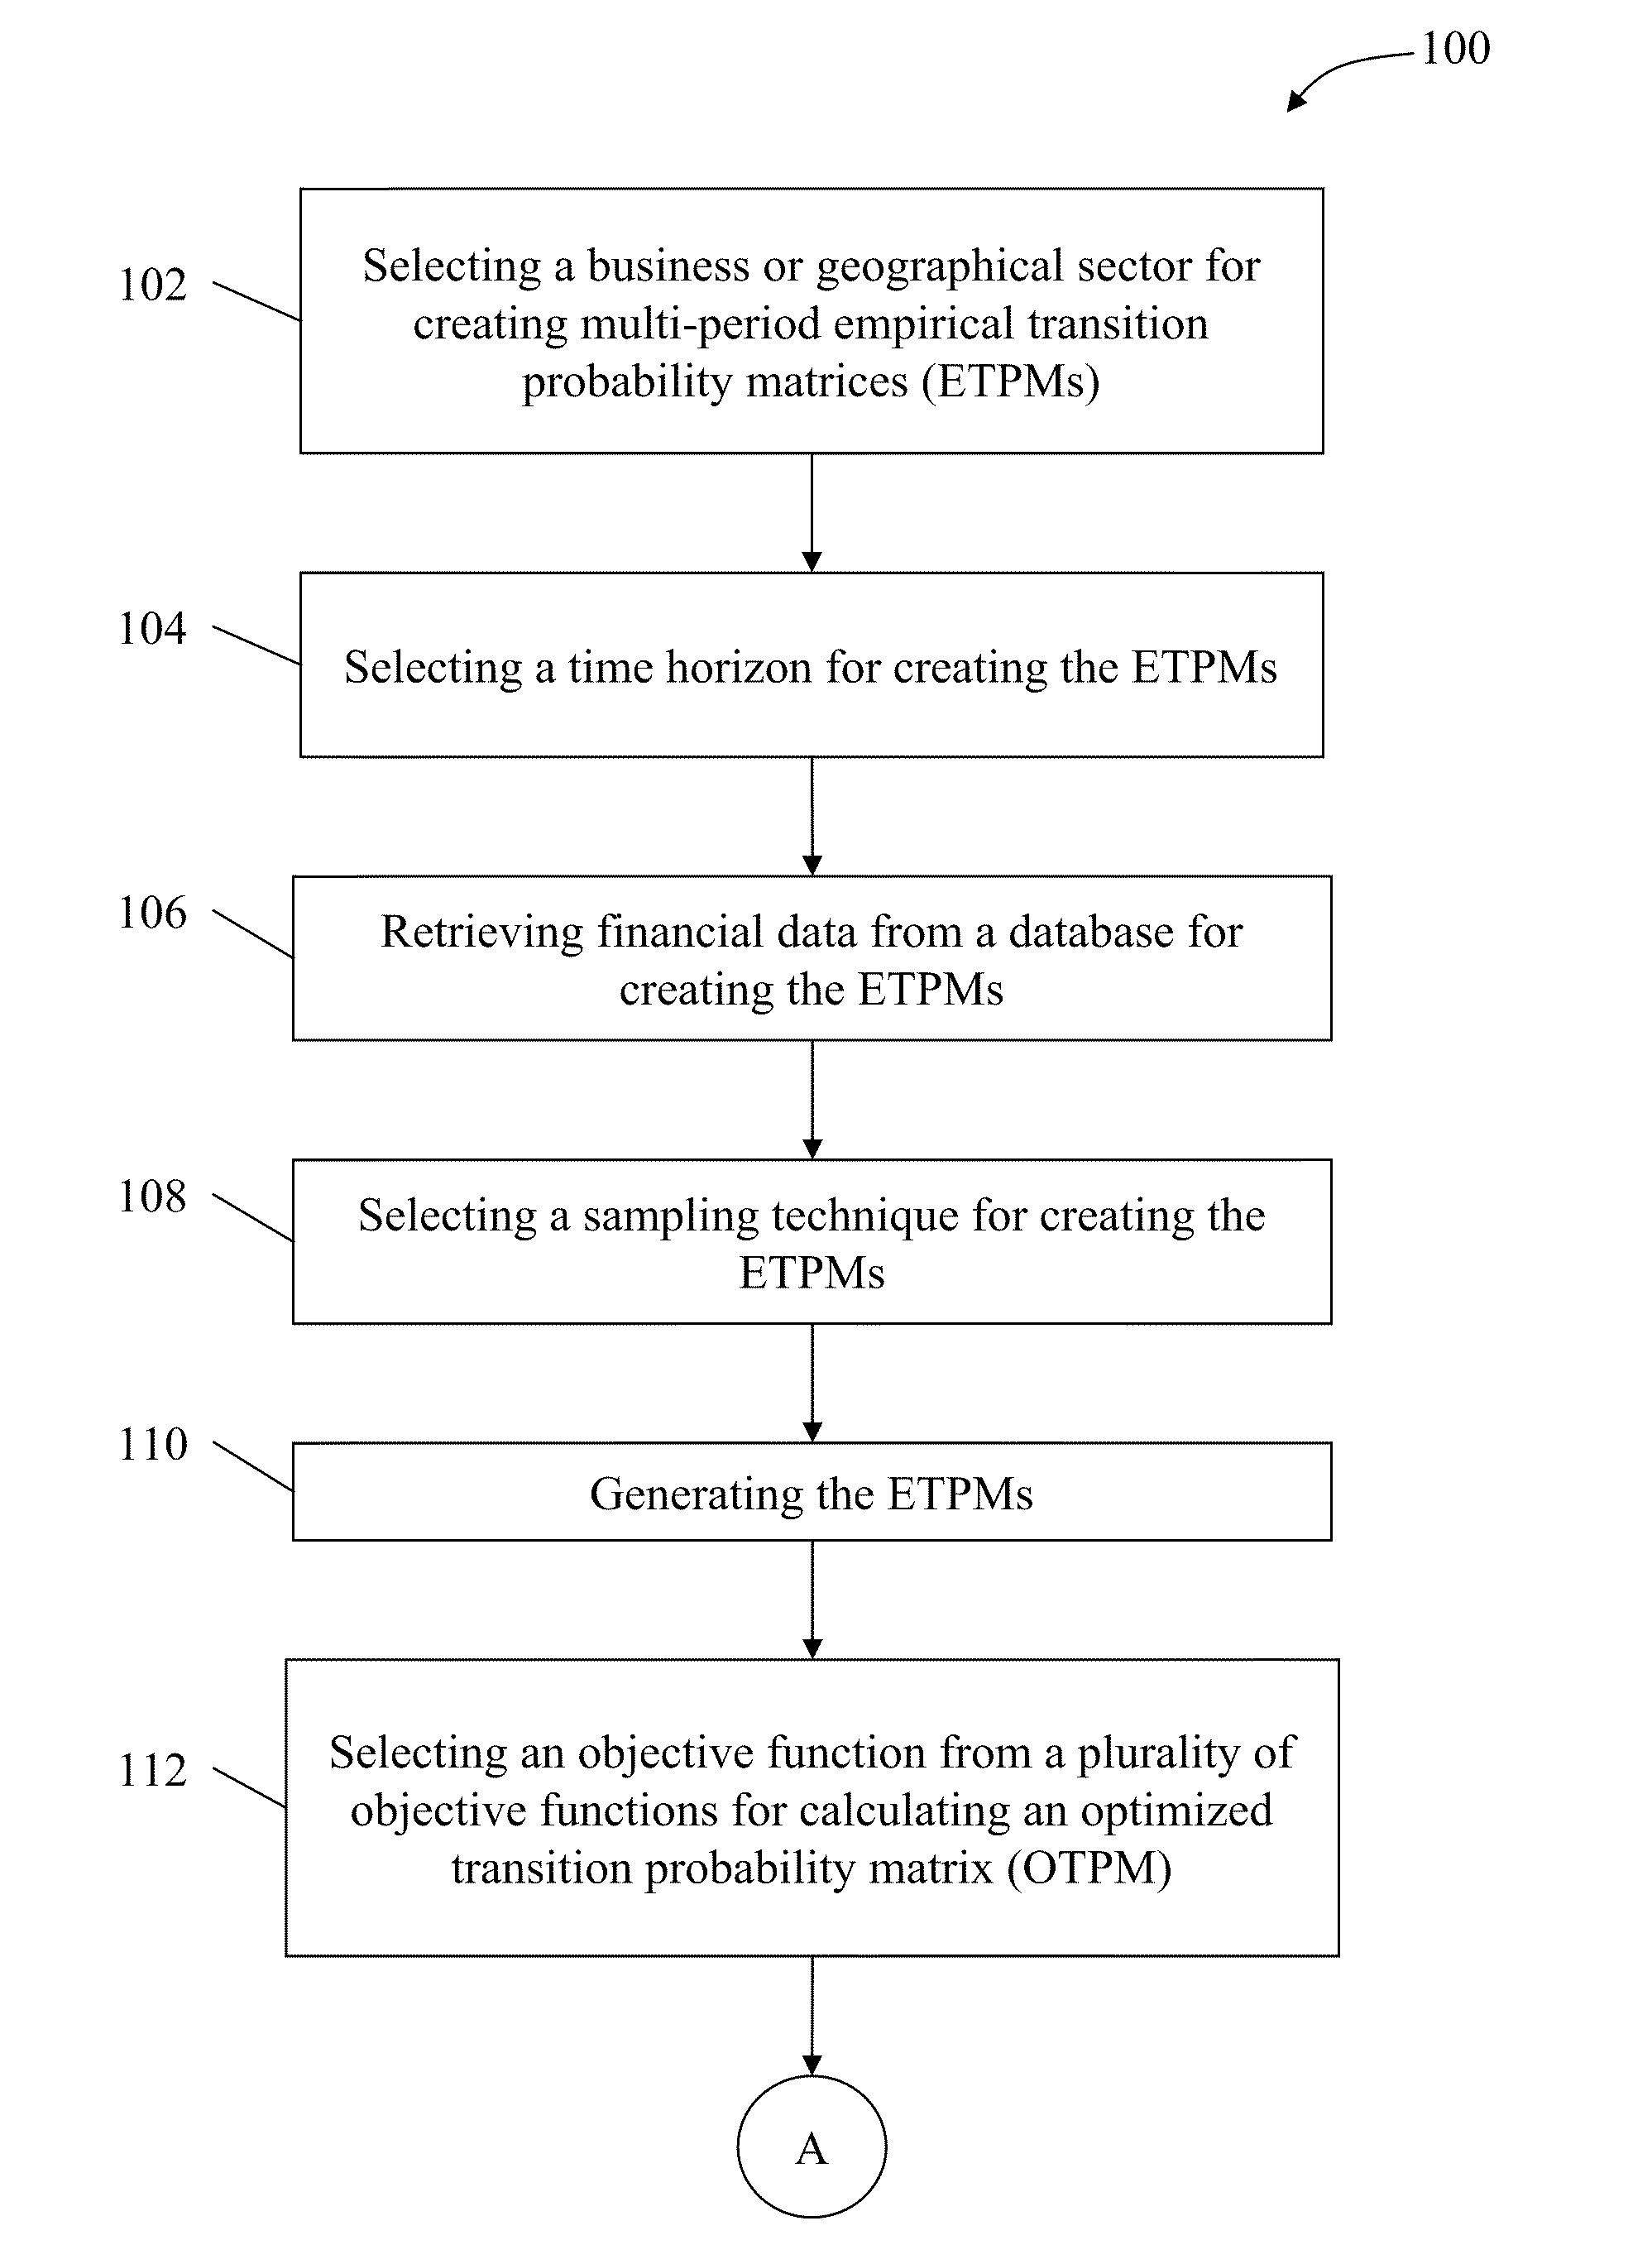 Methods and systems for generating transition probability matrices through an optimization framework